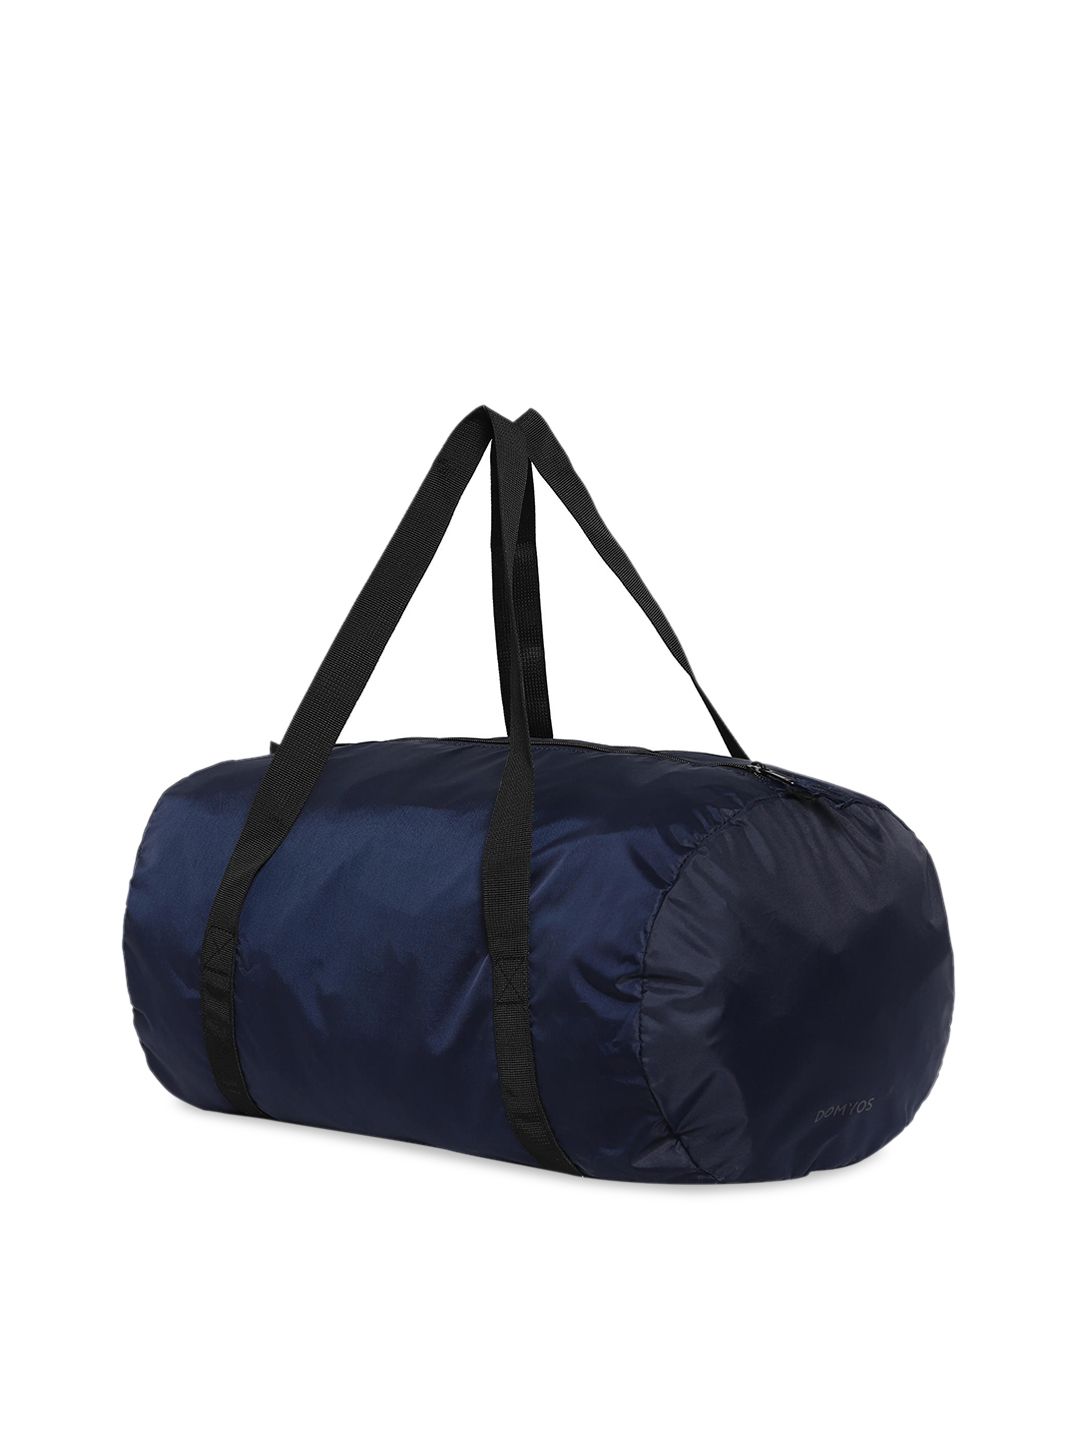 Domyos by Decathlon Unisex Navy Blue Fitness 30L Foldable Duffle Bag Price in India